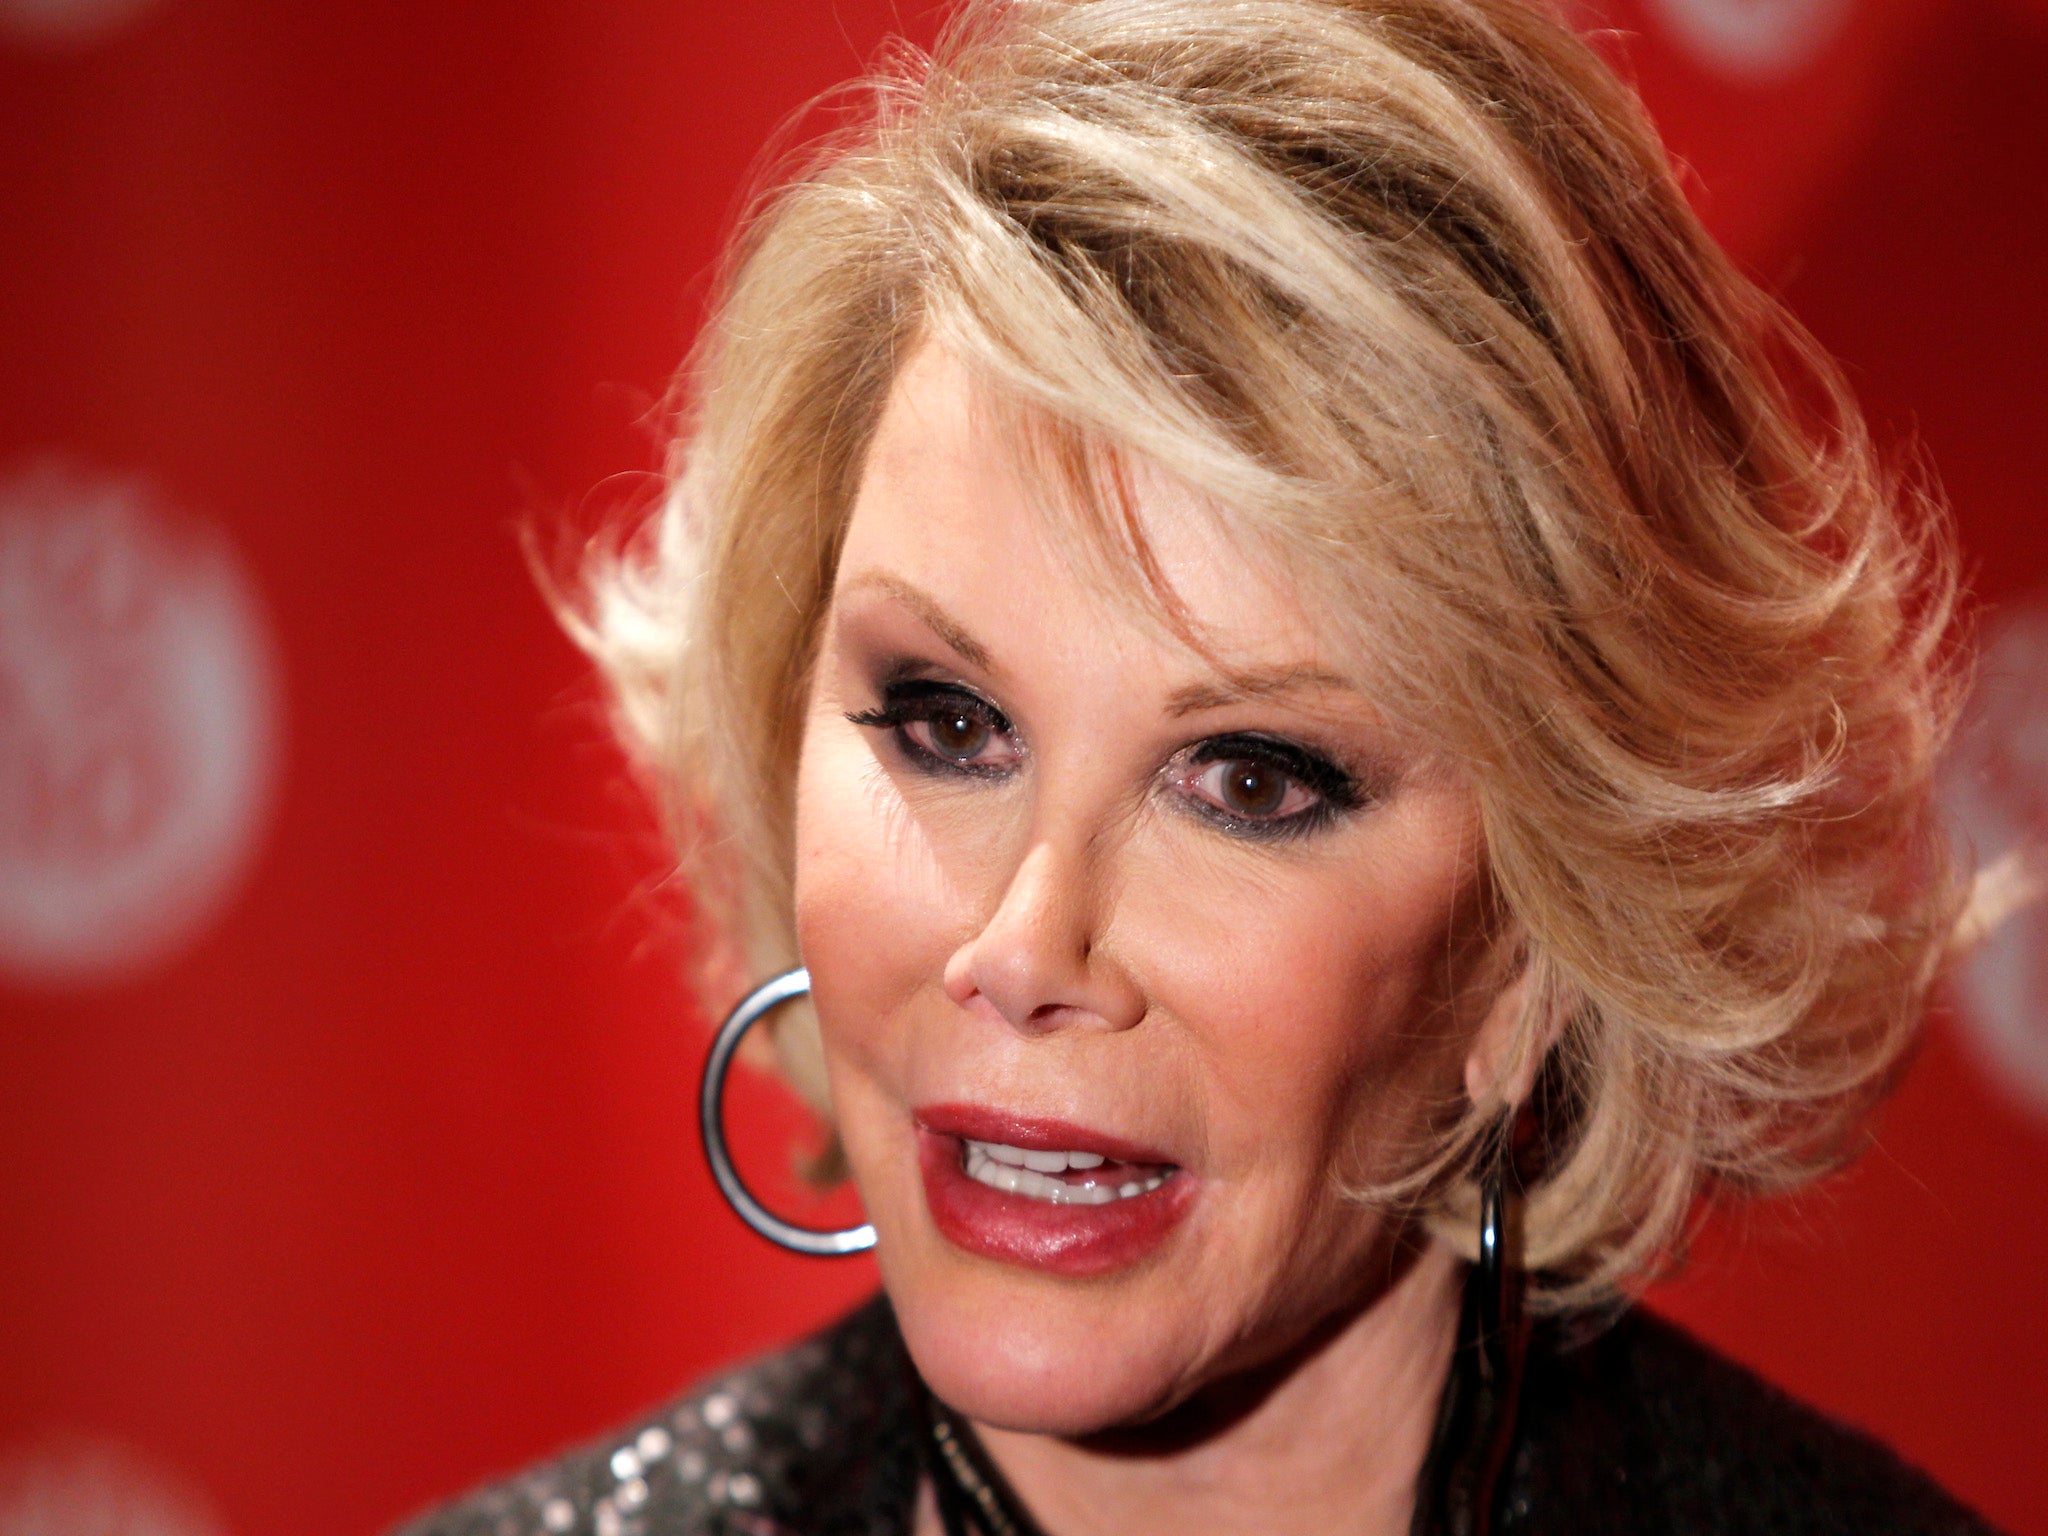 Joan Rivers died last September after undergoing minor surgery